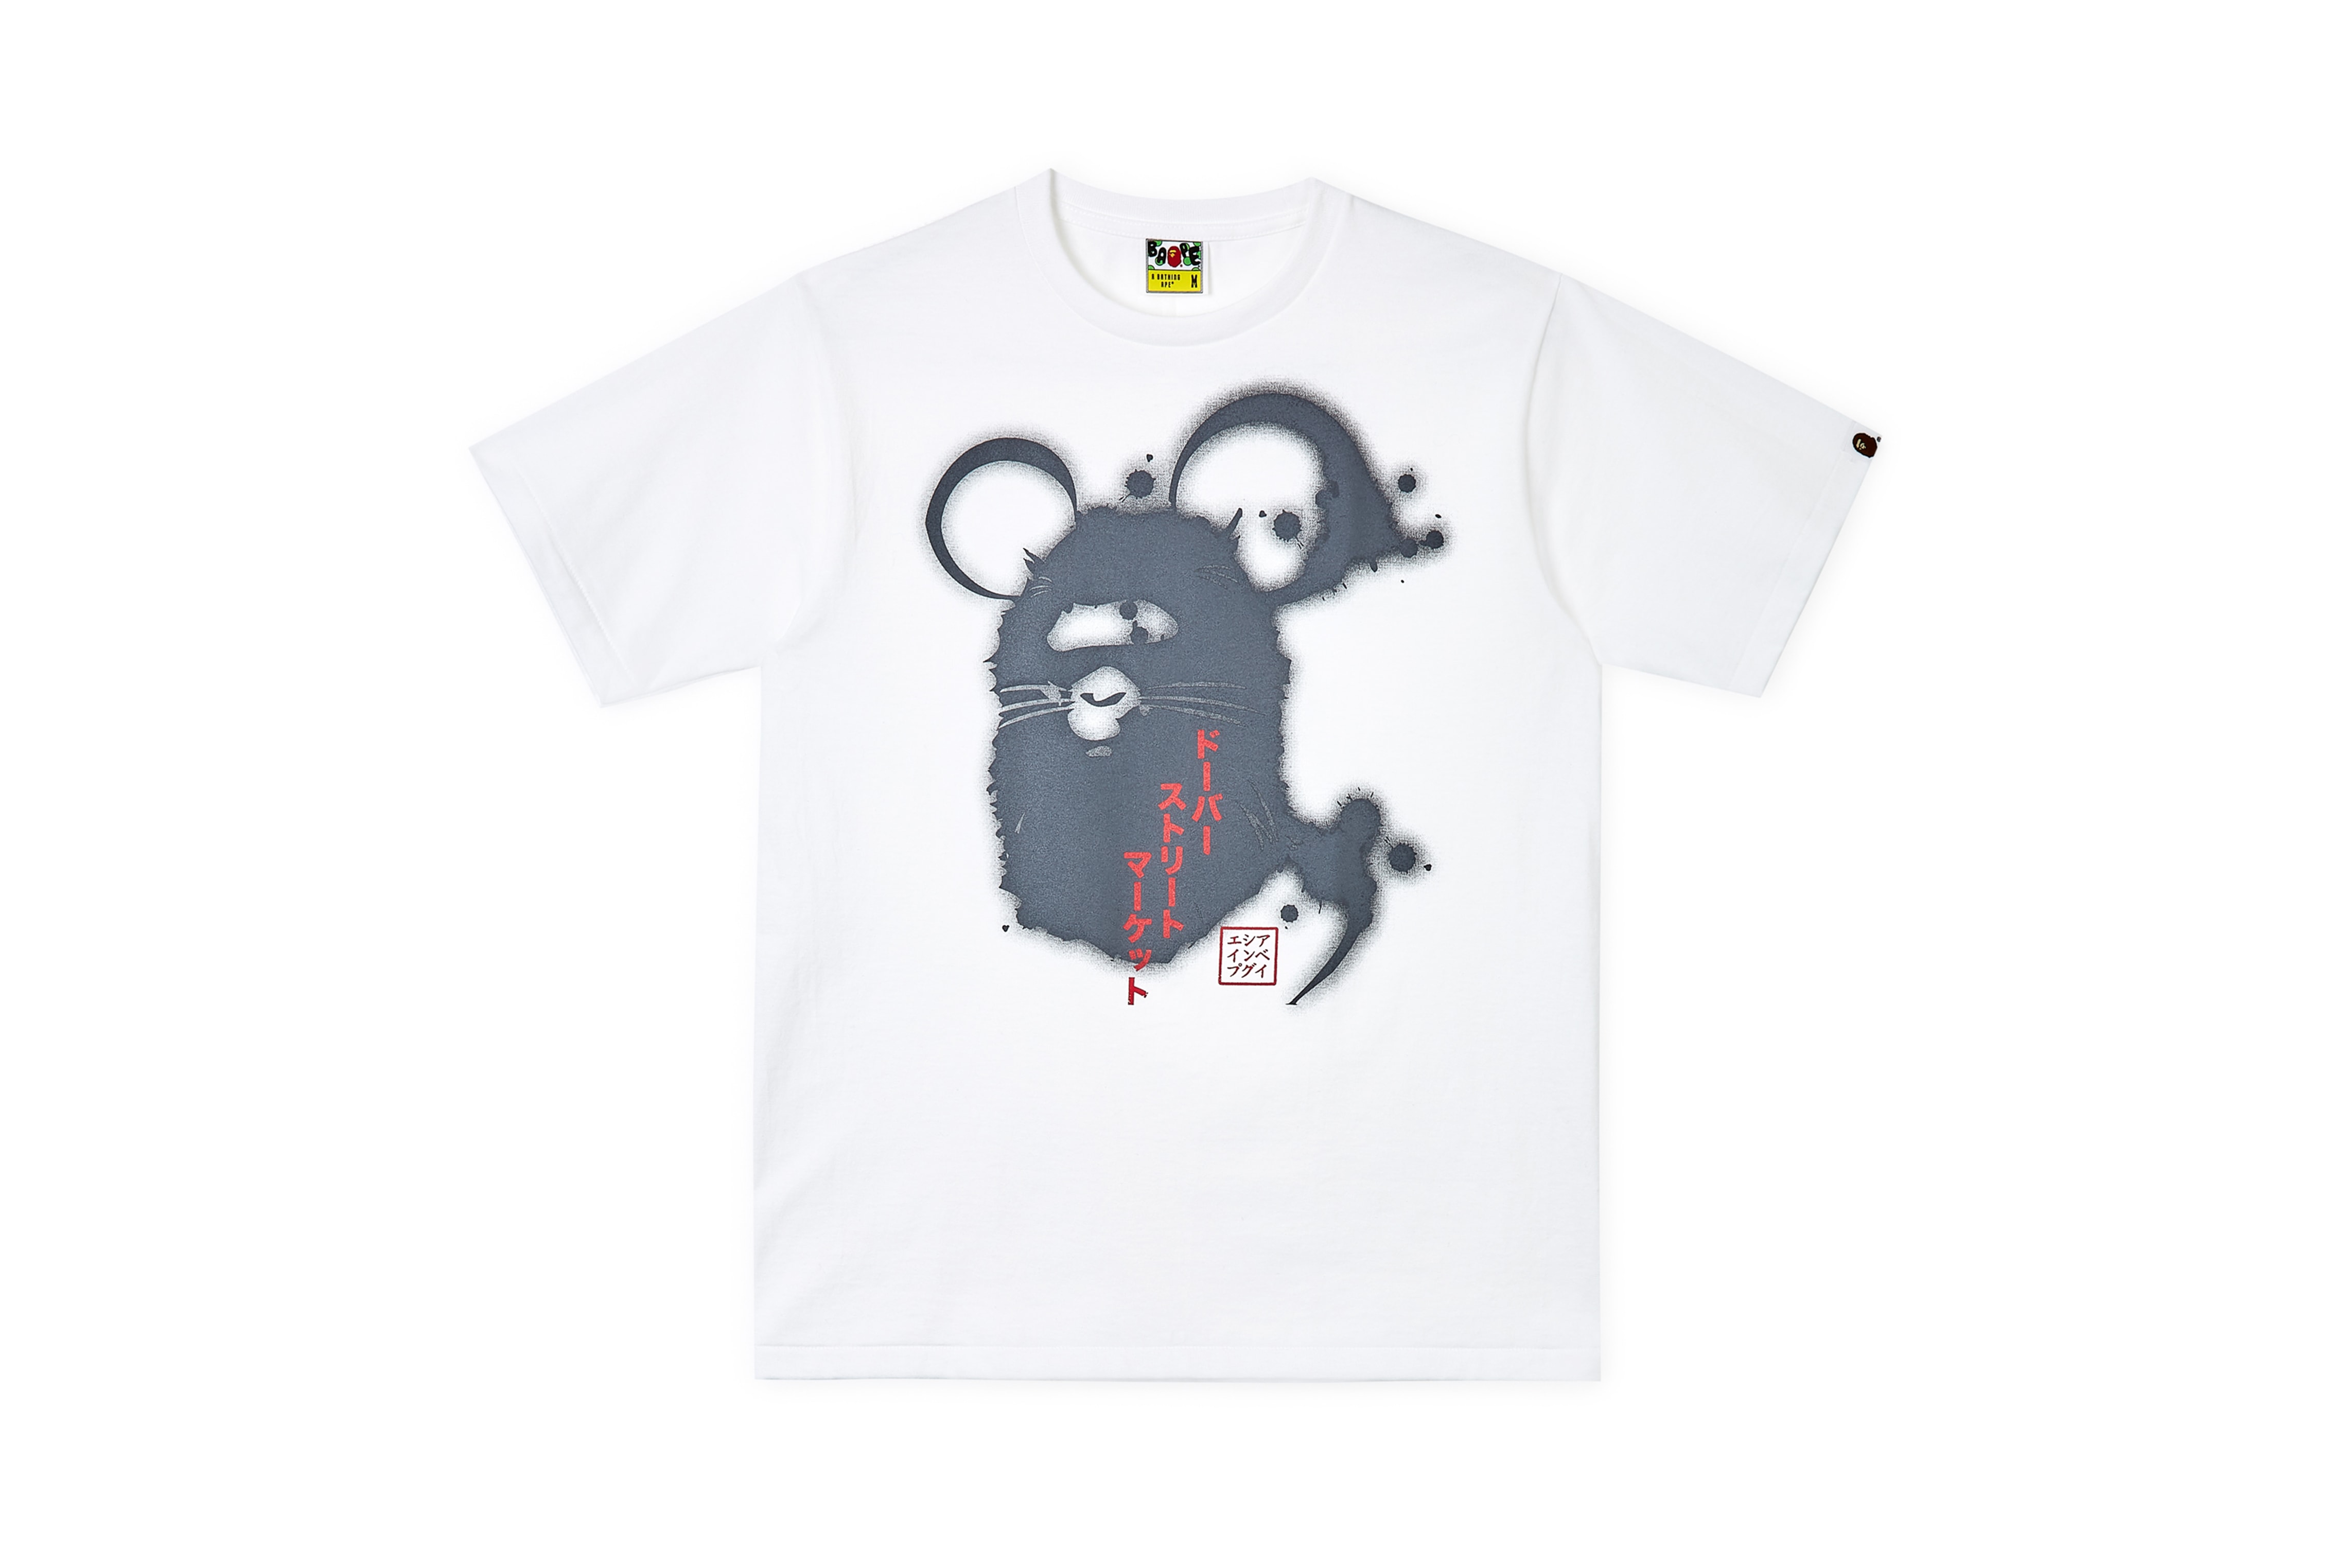 dover street market year of the rat lunar new year capsule collection collaboration bape richardson stussy brain dead nike snoopy cactus plant flea market doublet clot awake ny